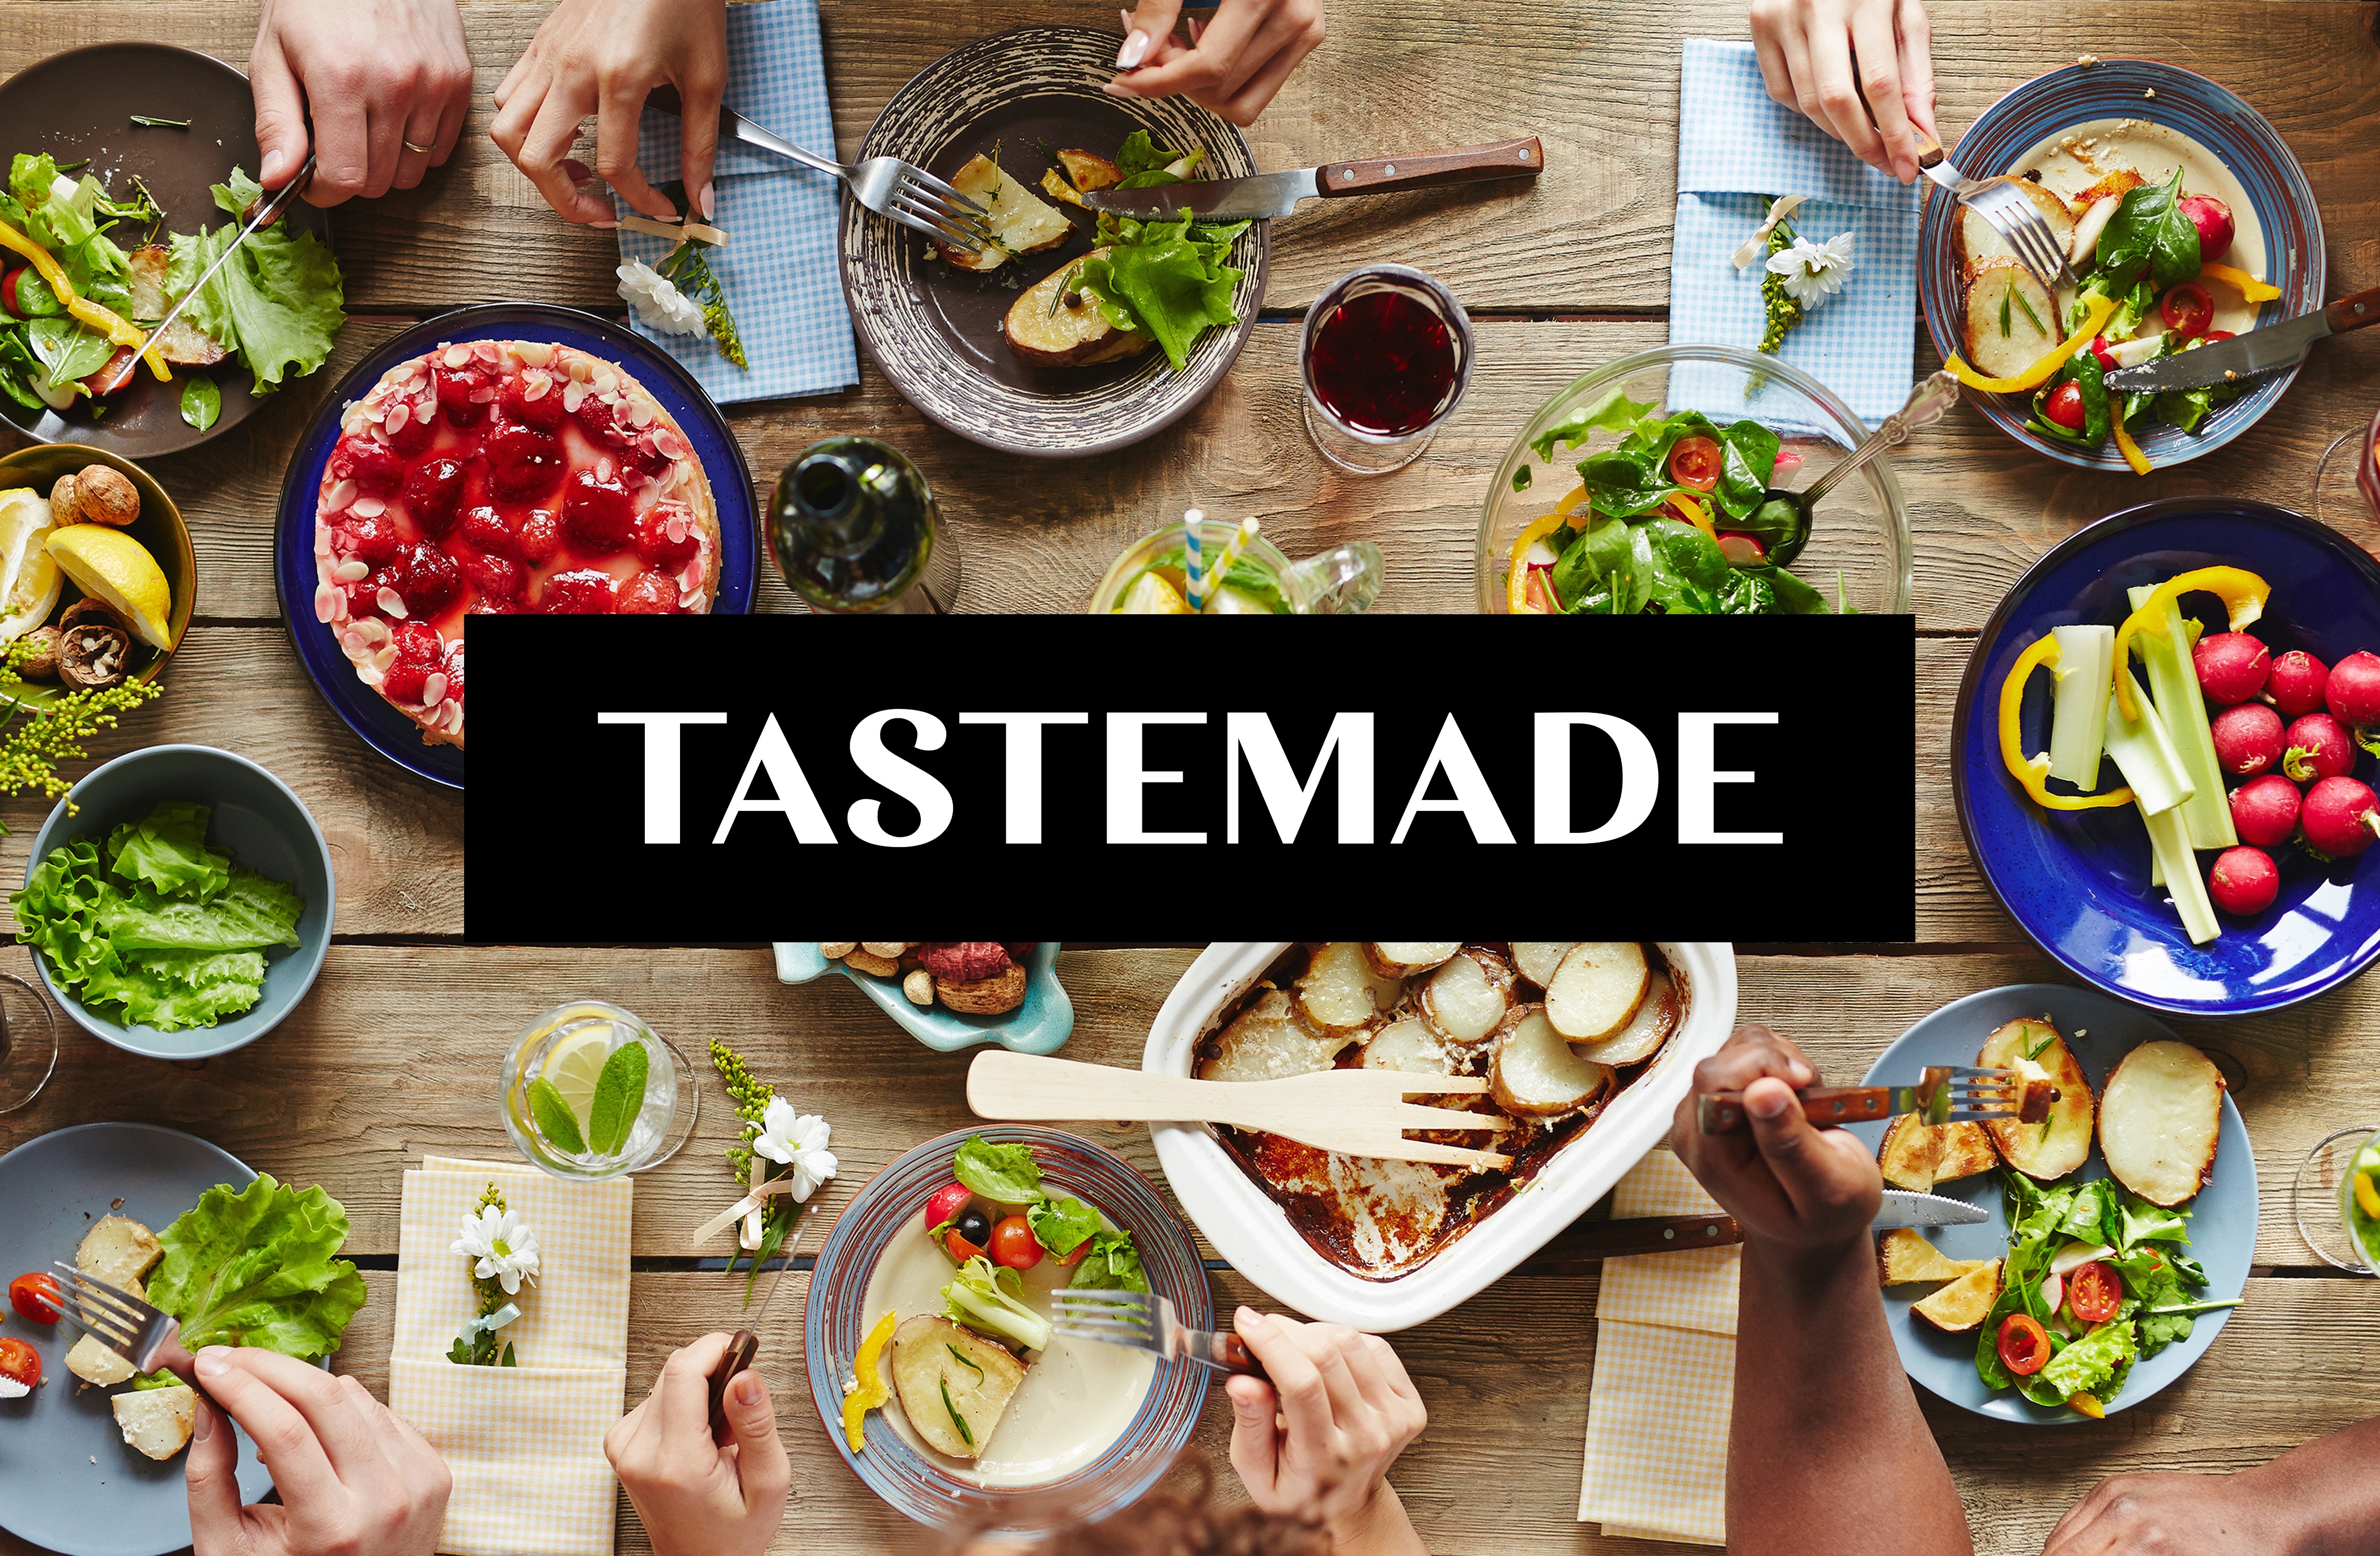 Amazon Partners With Tastemade to Launch 15 New Shows on Freevee and Prime Video